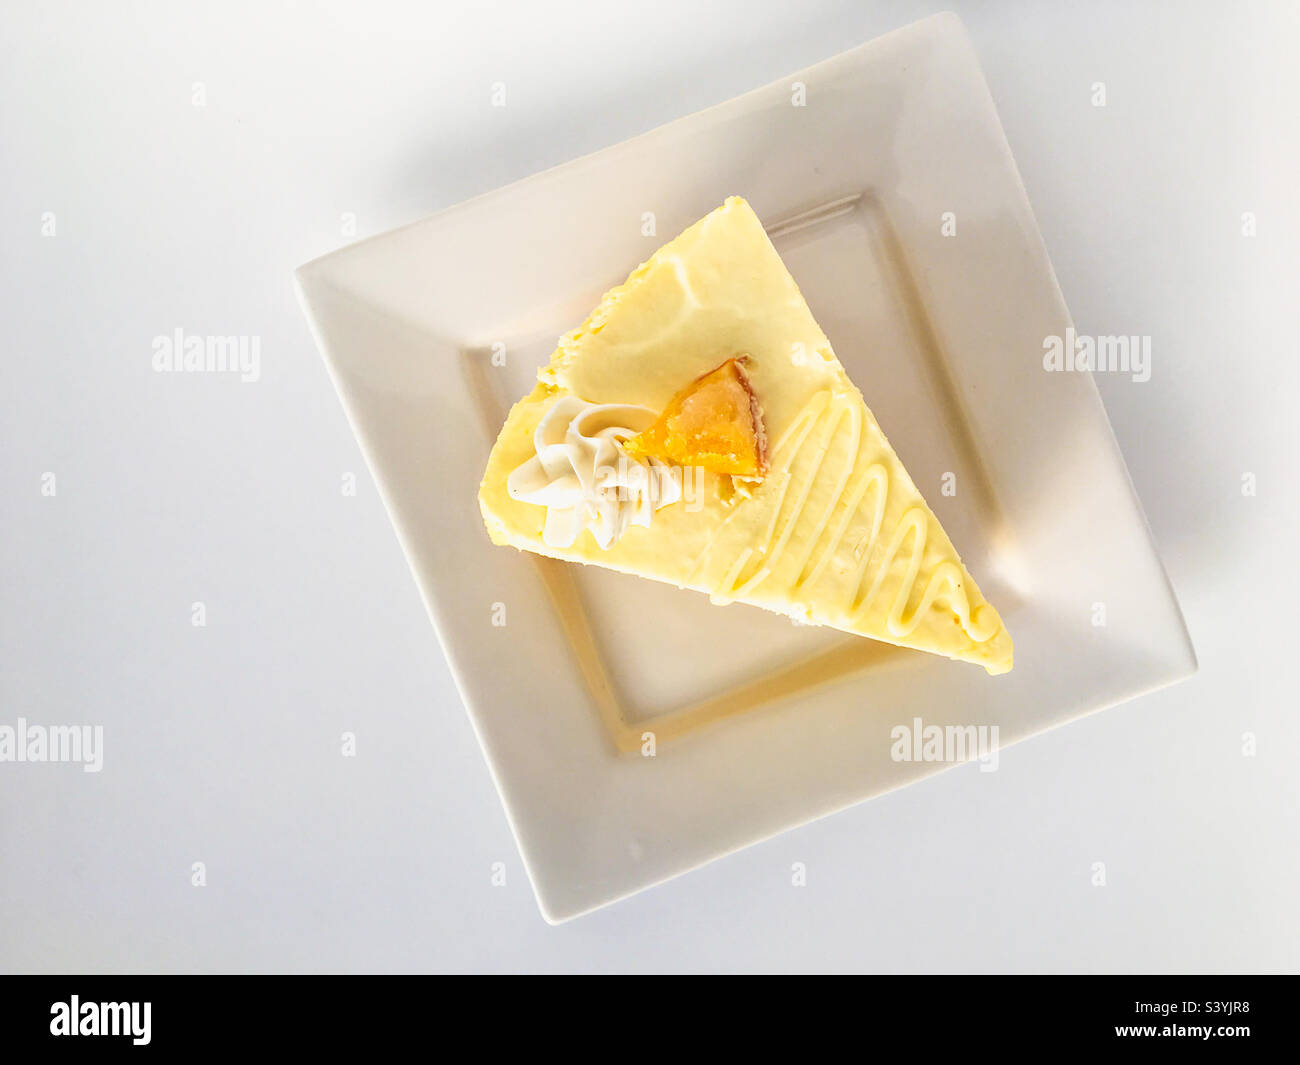 High angle view of a slice of fresh fruity mousse cake on a square white plate on white background. Stock Photo